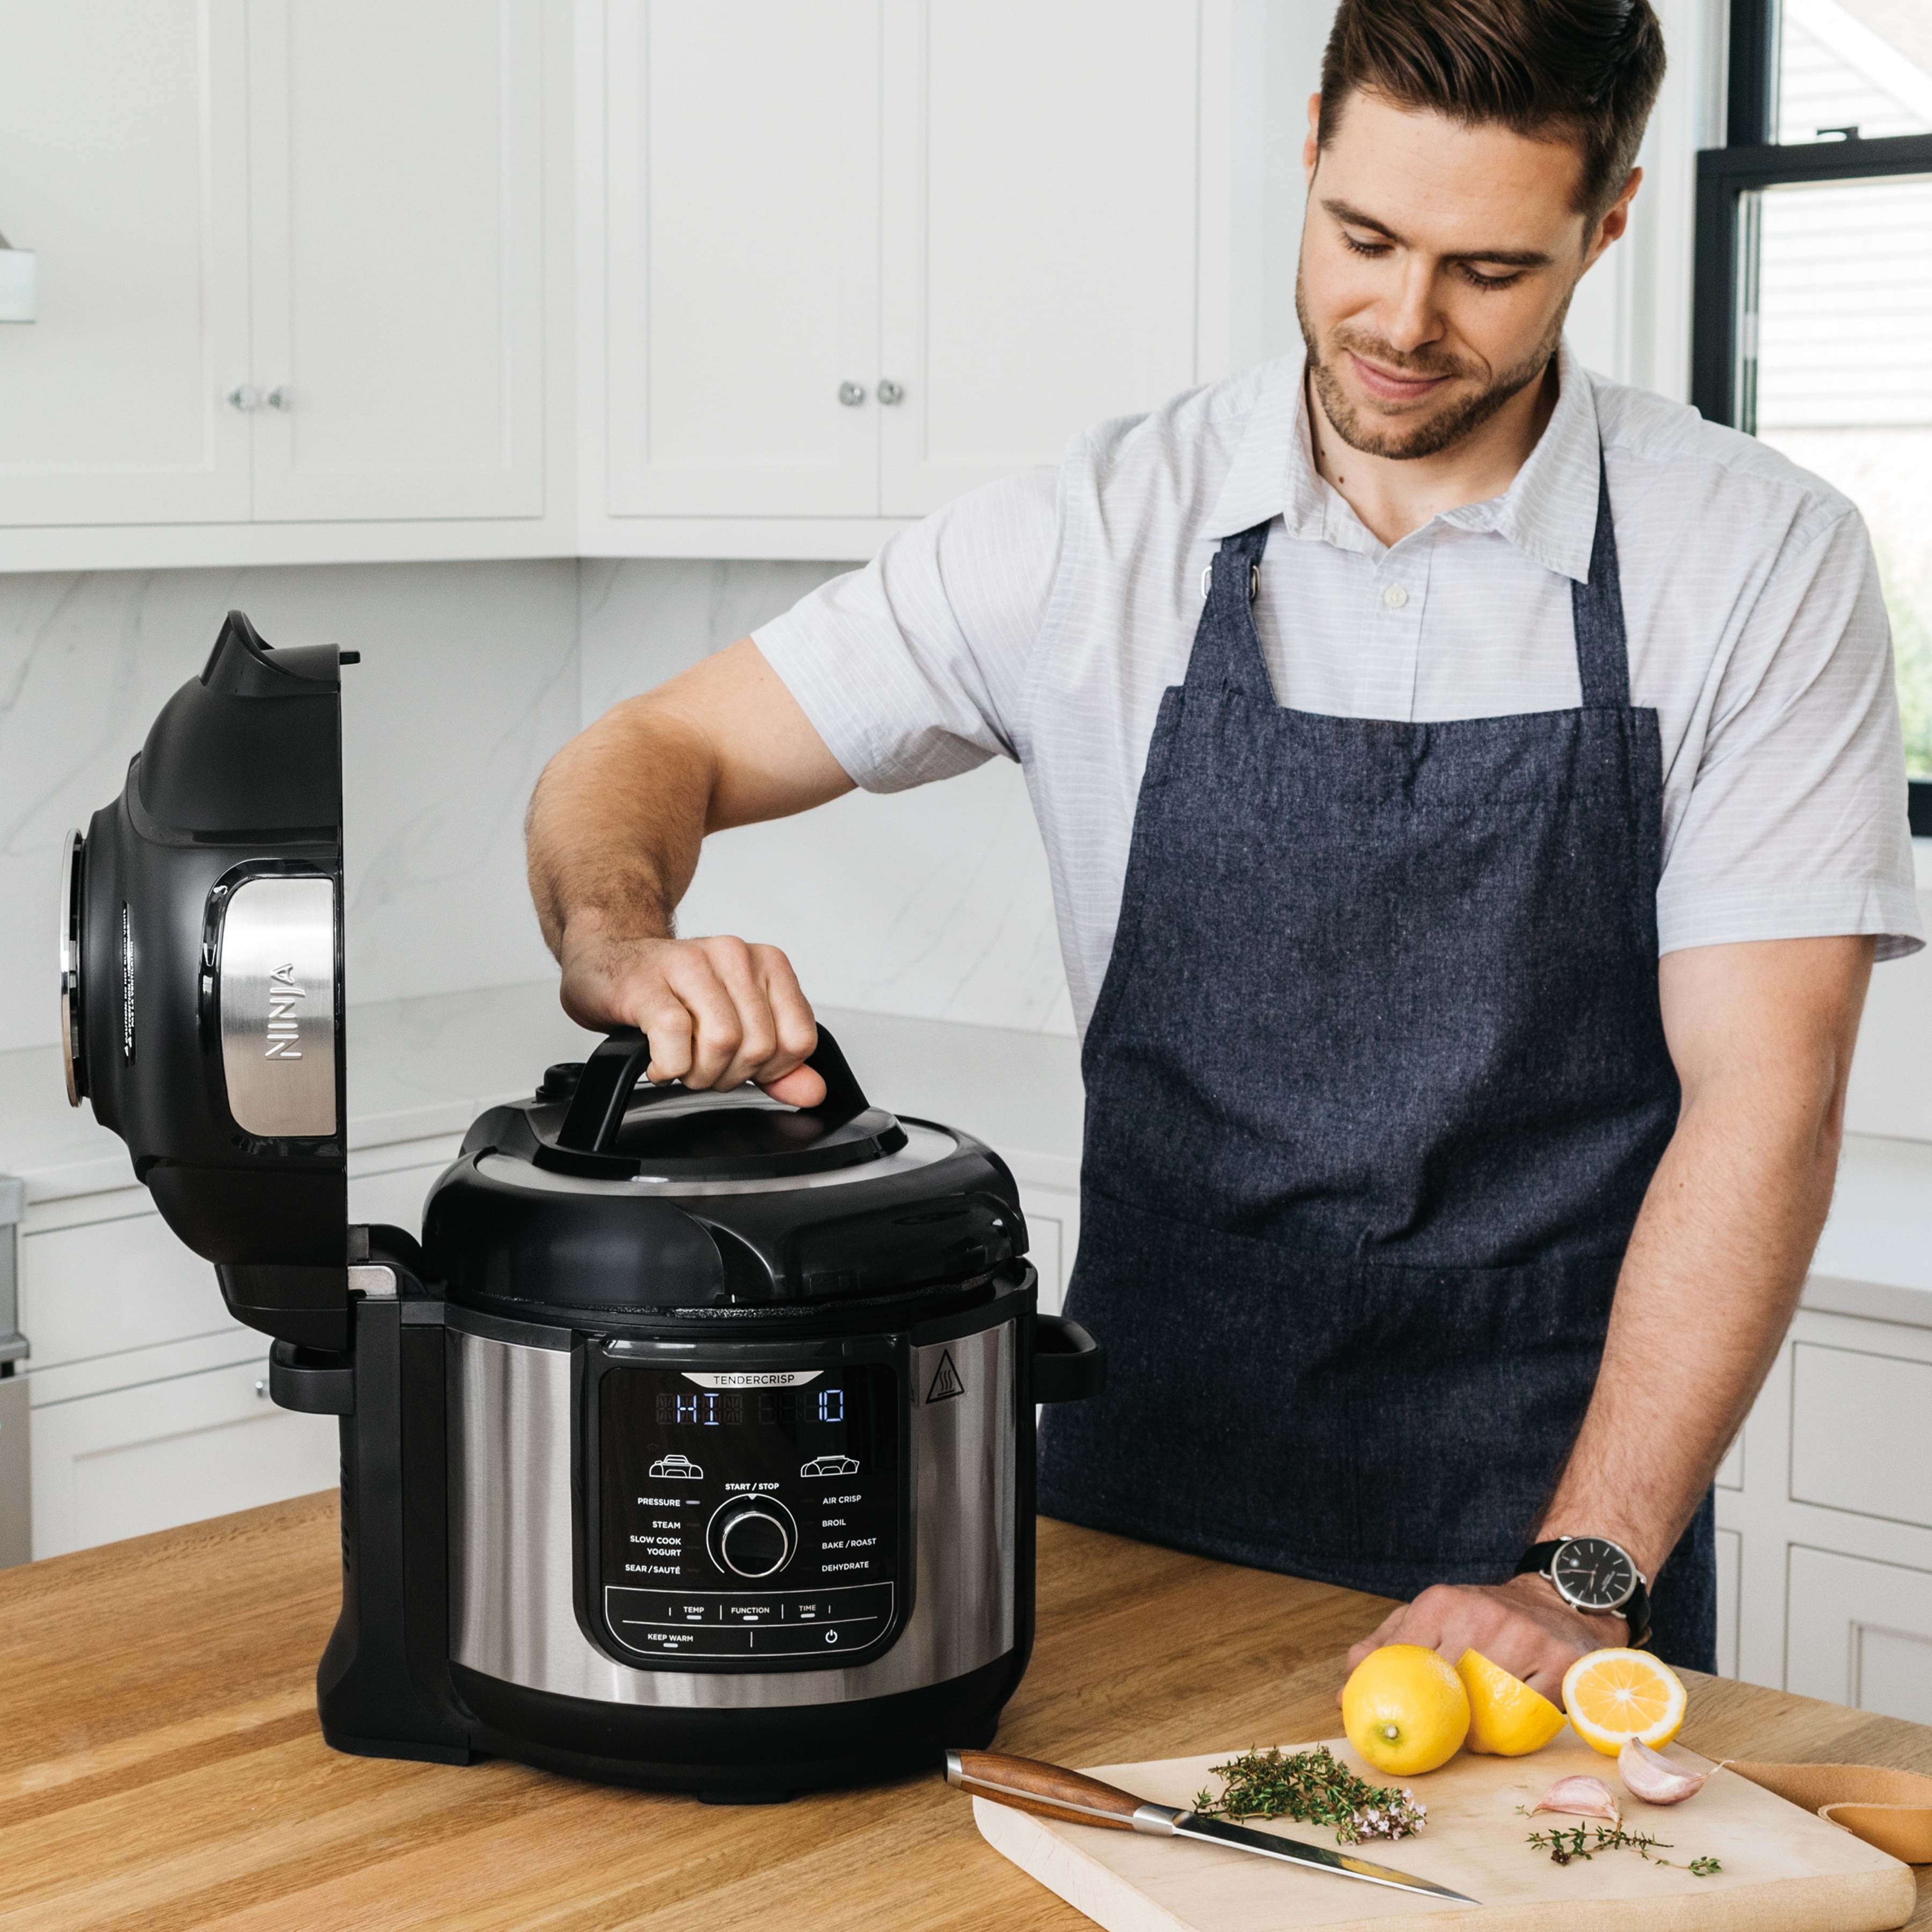 Makes healthy eating DELICIOUS!' The Ninja Foodi pressure cooker and air  fryer that's 'life-changing' for millions of Americans is reduced by 21% on  QVC in a giant 8-quart size